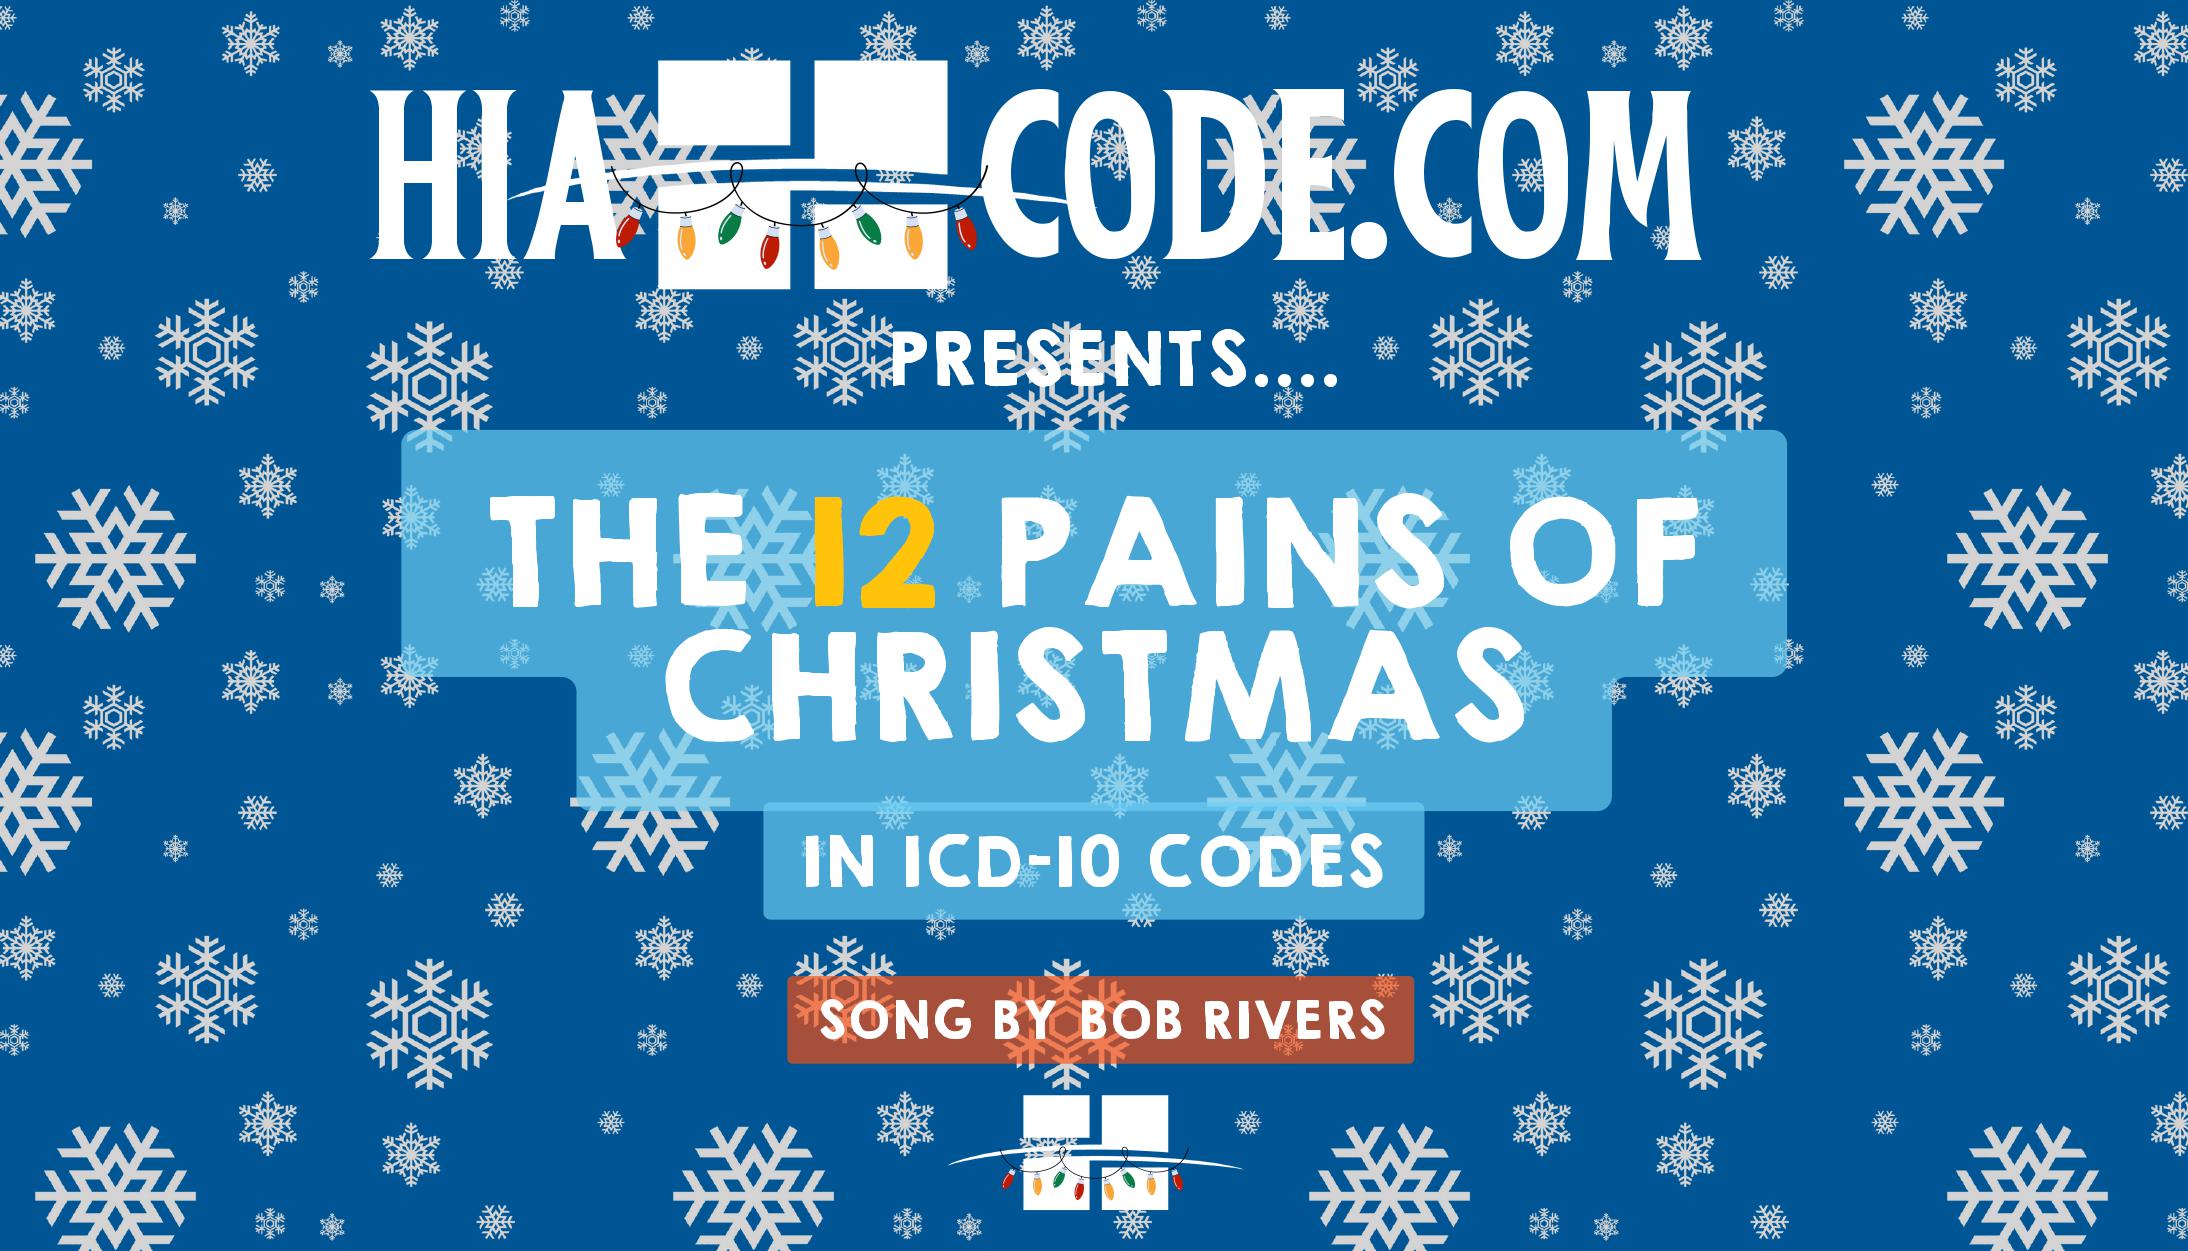 12 pains of Christmas in ICD-10 code